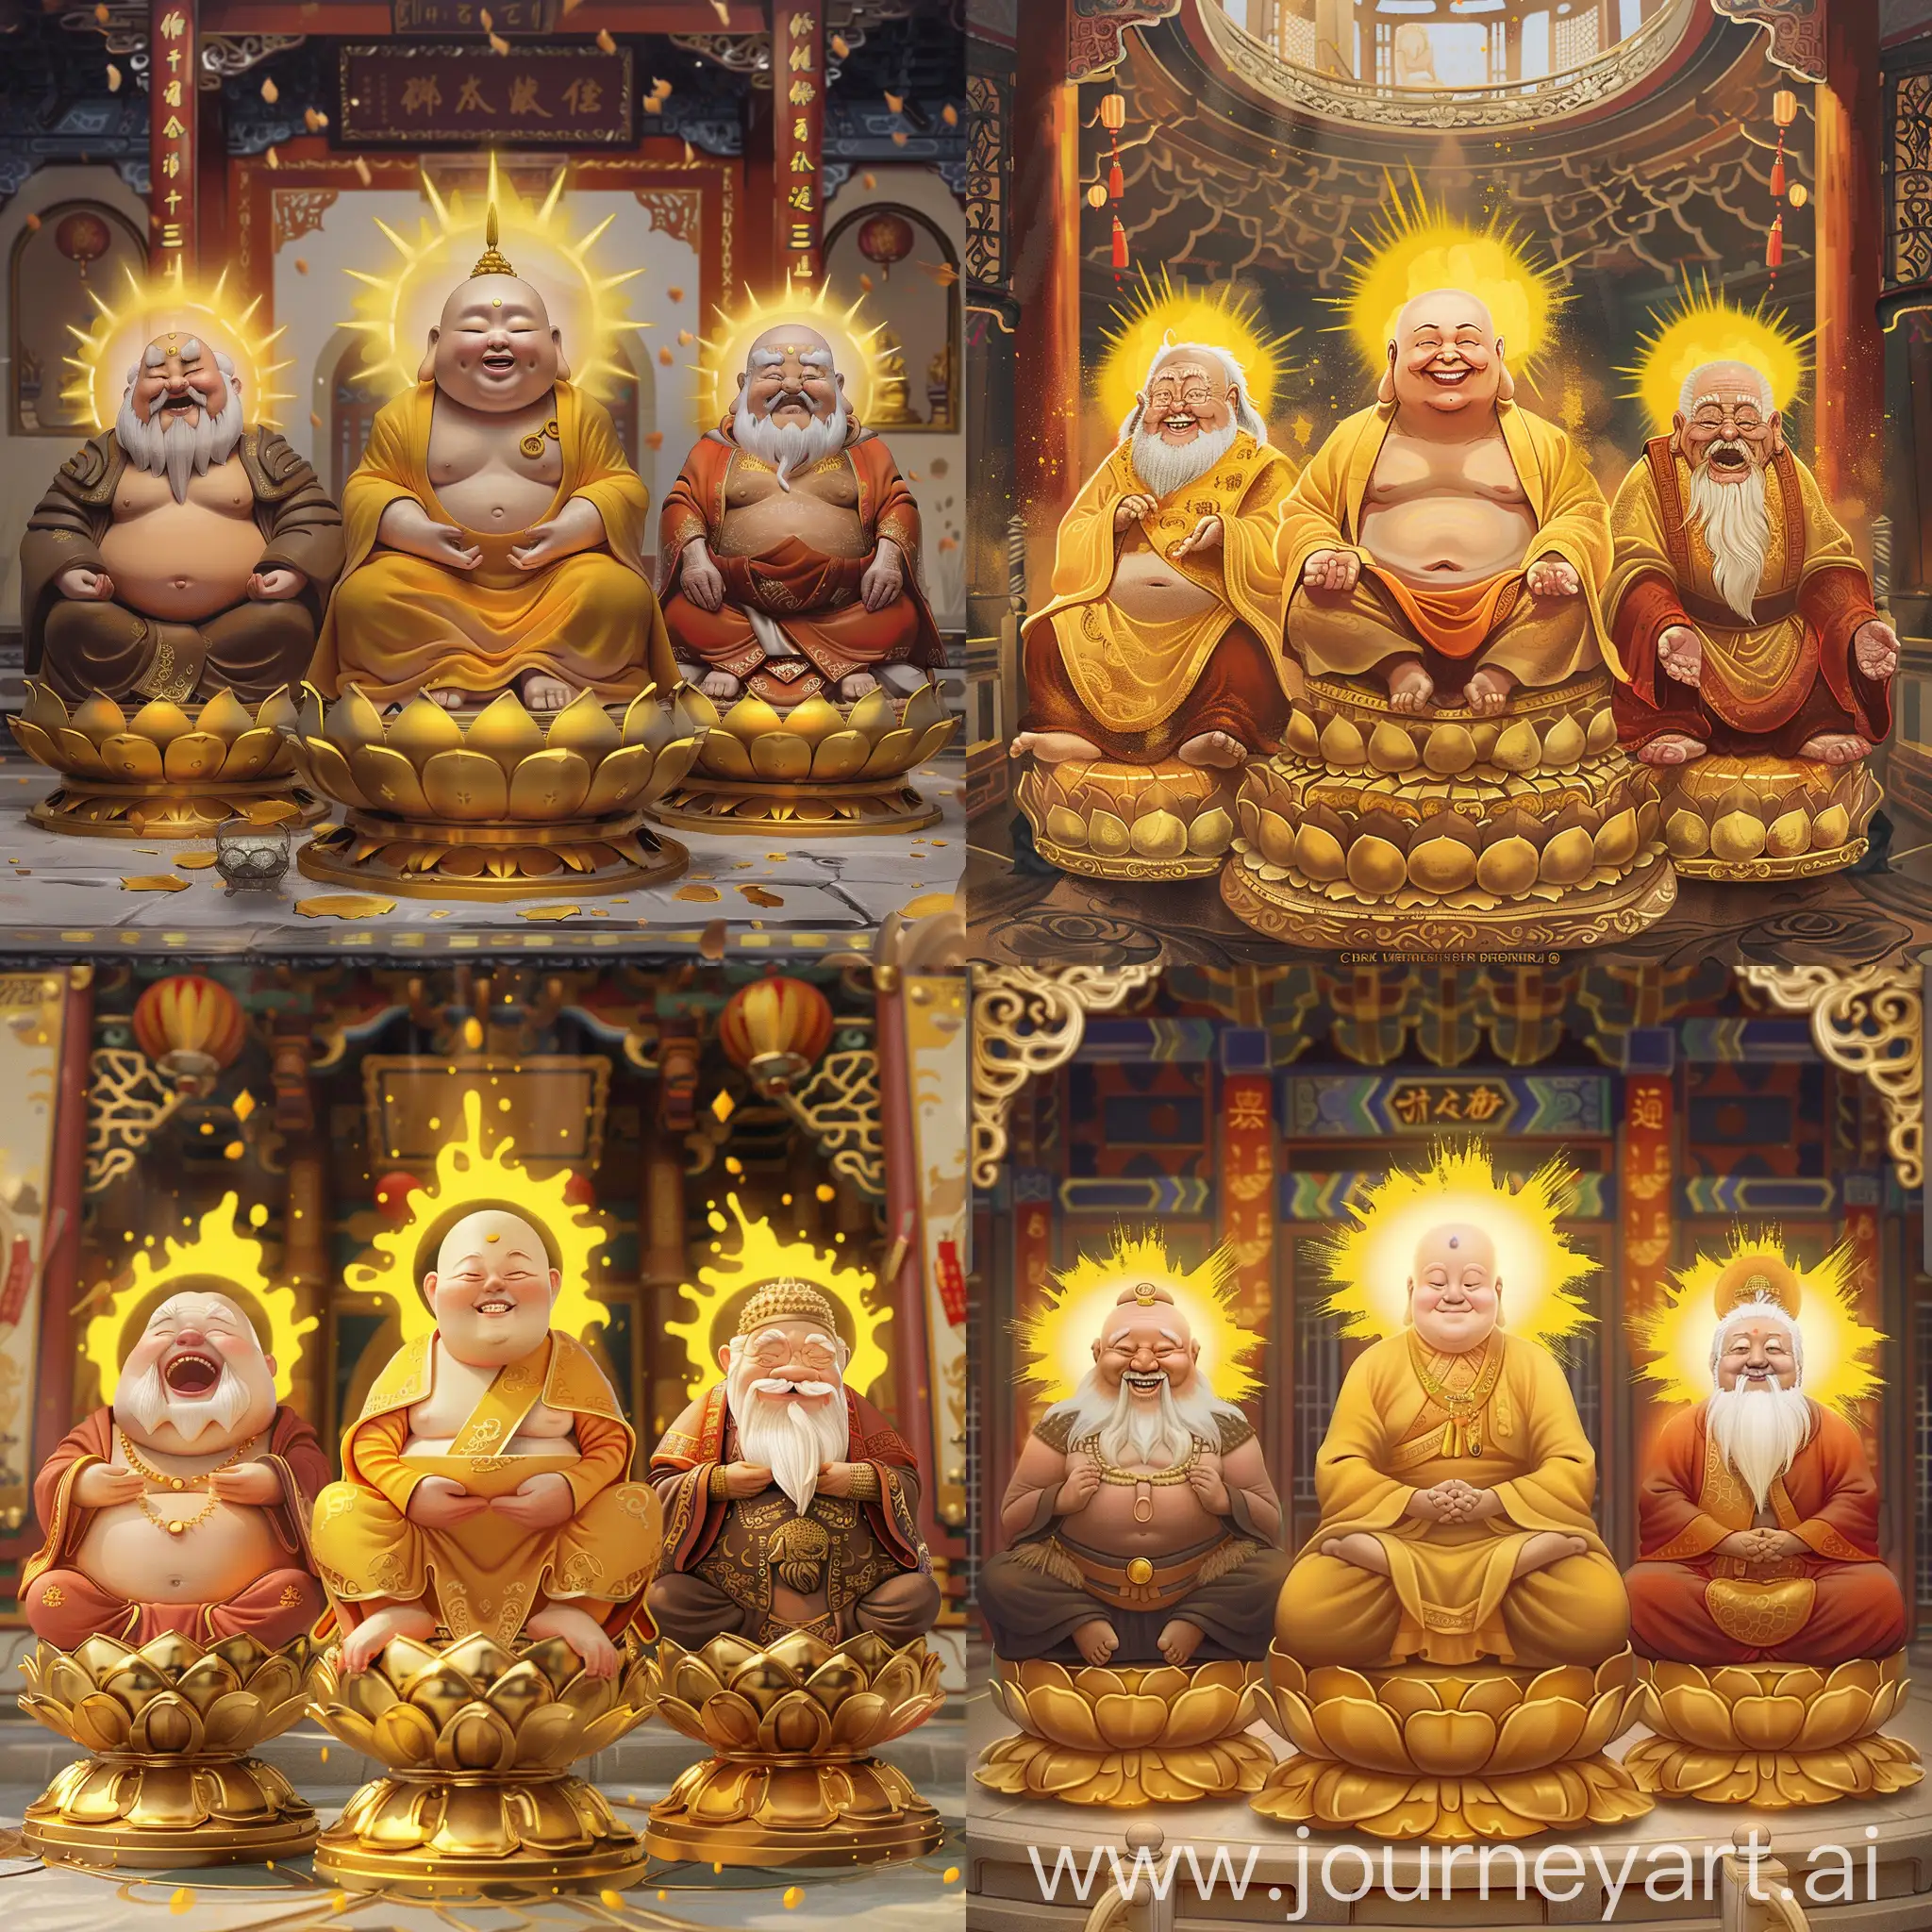 Painting mode :
three Chinese style Buddhas are meditating on their golden Indian lotus thrones, they all have yellow auroras behind their heads,

the middle one is the middle-aged elegant Gautama, Gautama has  yellow Chinese Buddhist clothes, Guatama has no beards,

the right one is Maitreya, Maitreya is a chubby laughing Chinese Buddha with deep orange and brown clothes,

the left one is an old Dipankara, Dipankara has white long beards and red Chinese Buddhist clothes, 

they are all inside a splendid Chinese Buddhist temple,